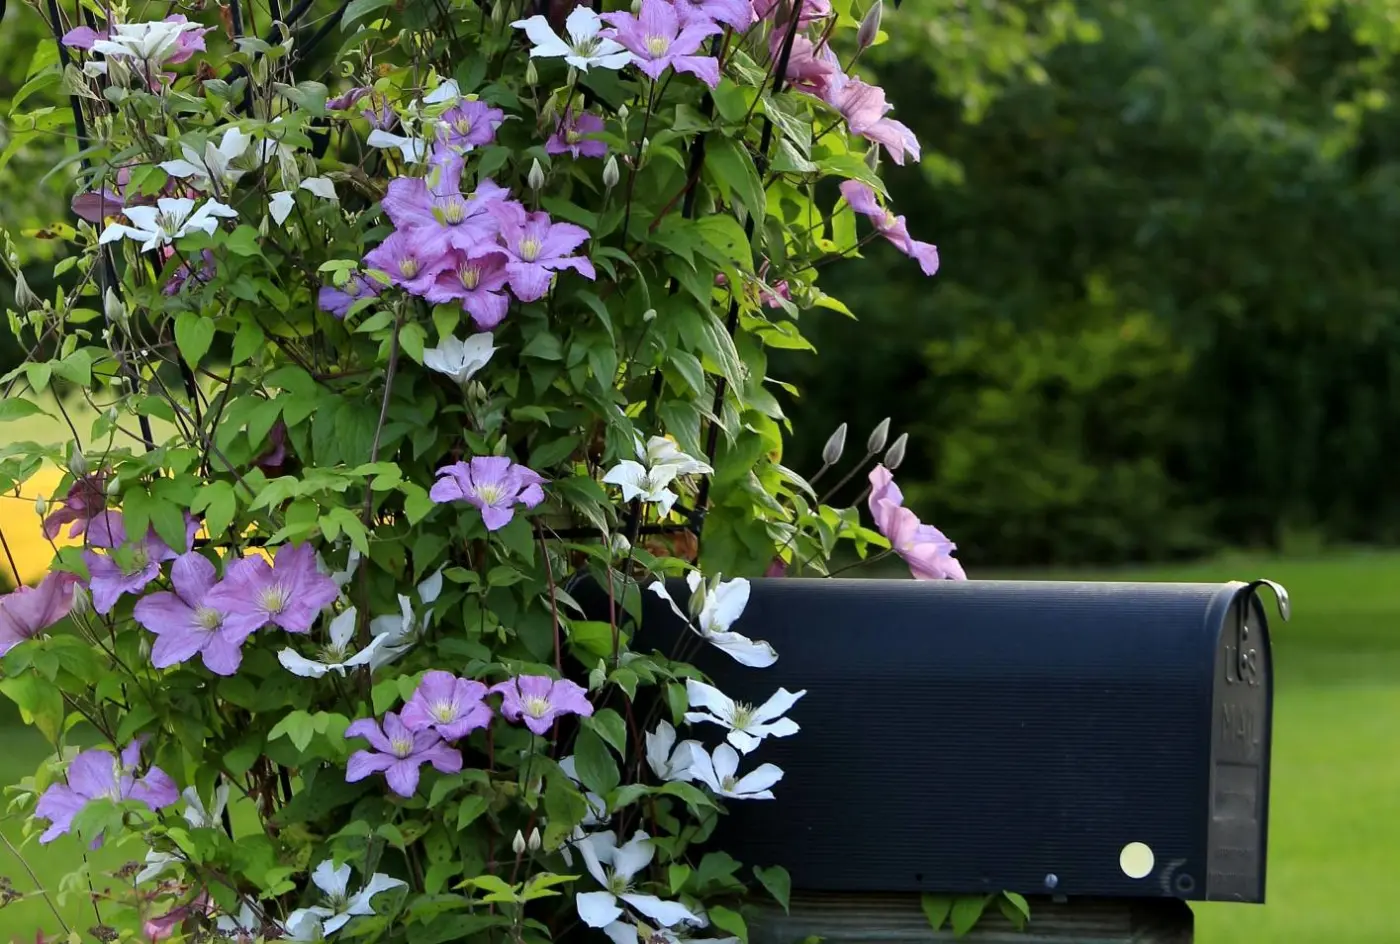 Enhancing the aesthetic appeal of your outdoor mailbox with climbing plants can transform a mundane feature into a striking garden focal point.